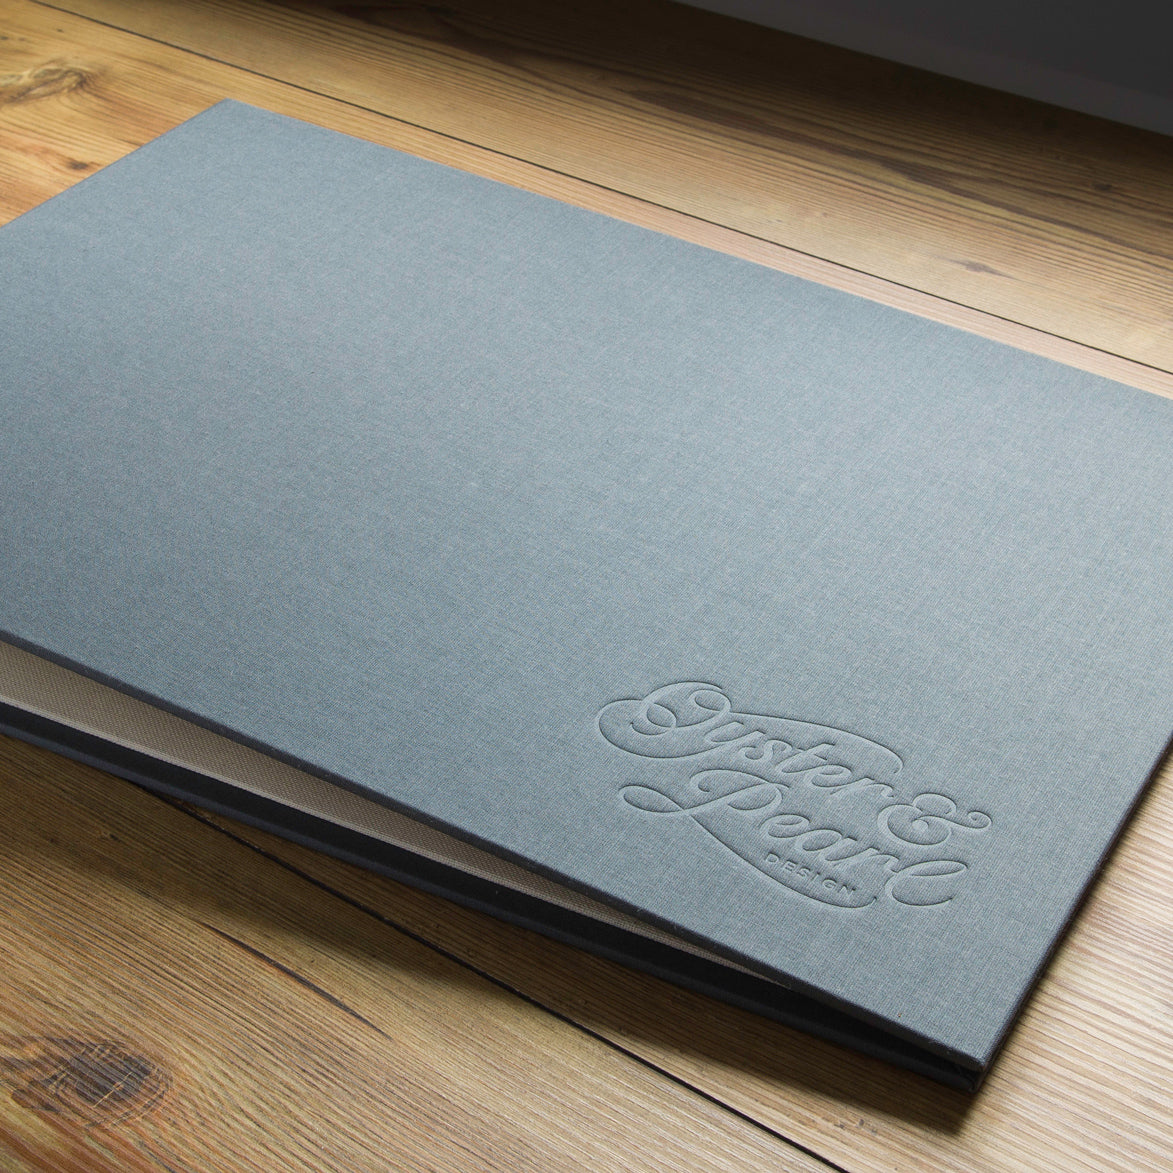 Portfolio book with blind embossed personalised cover